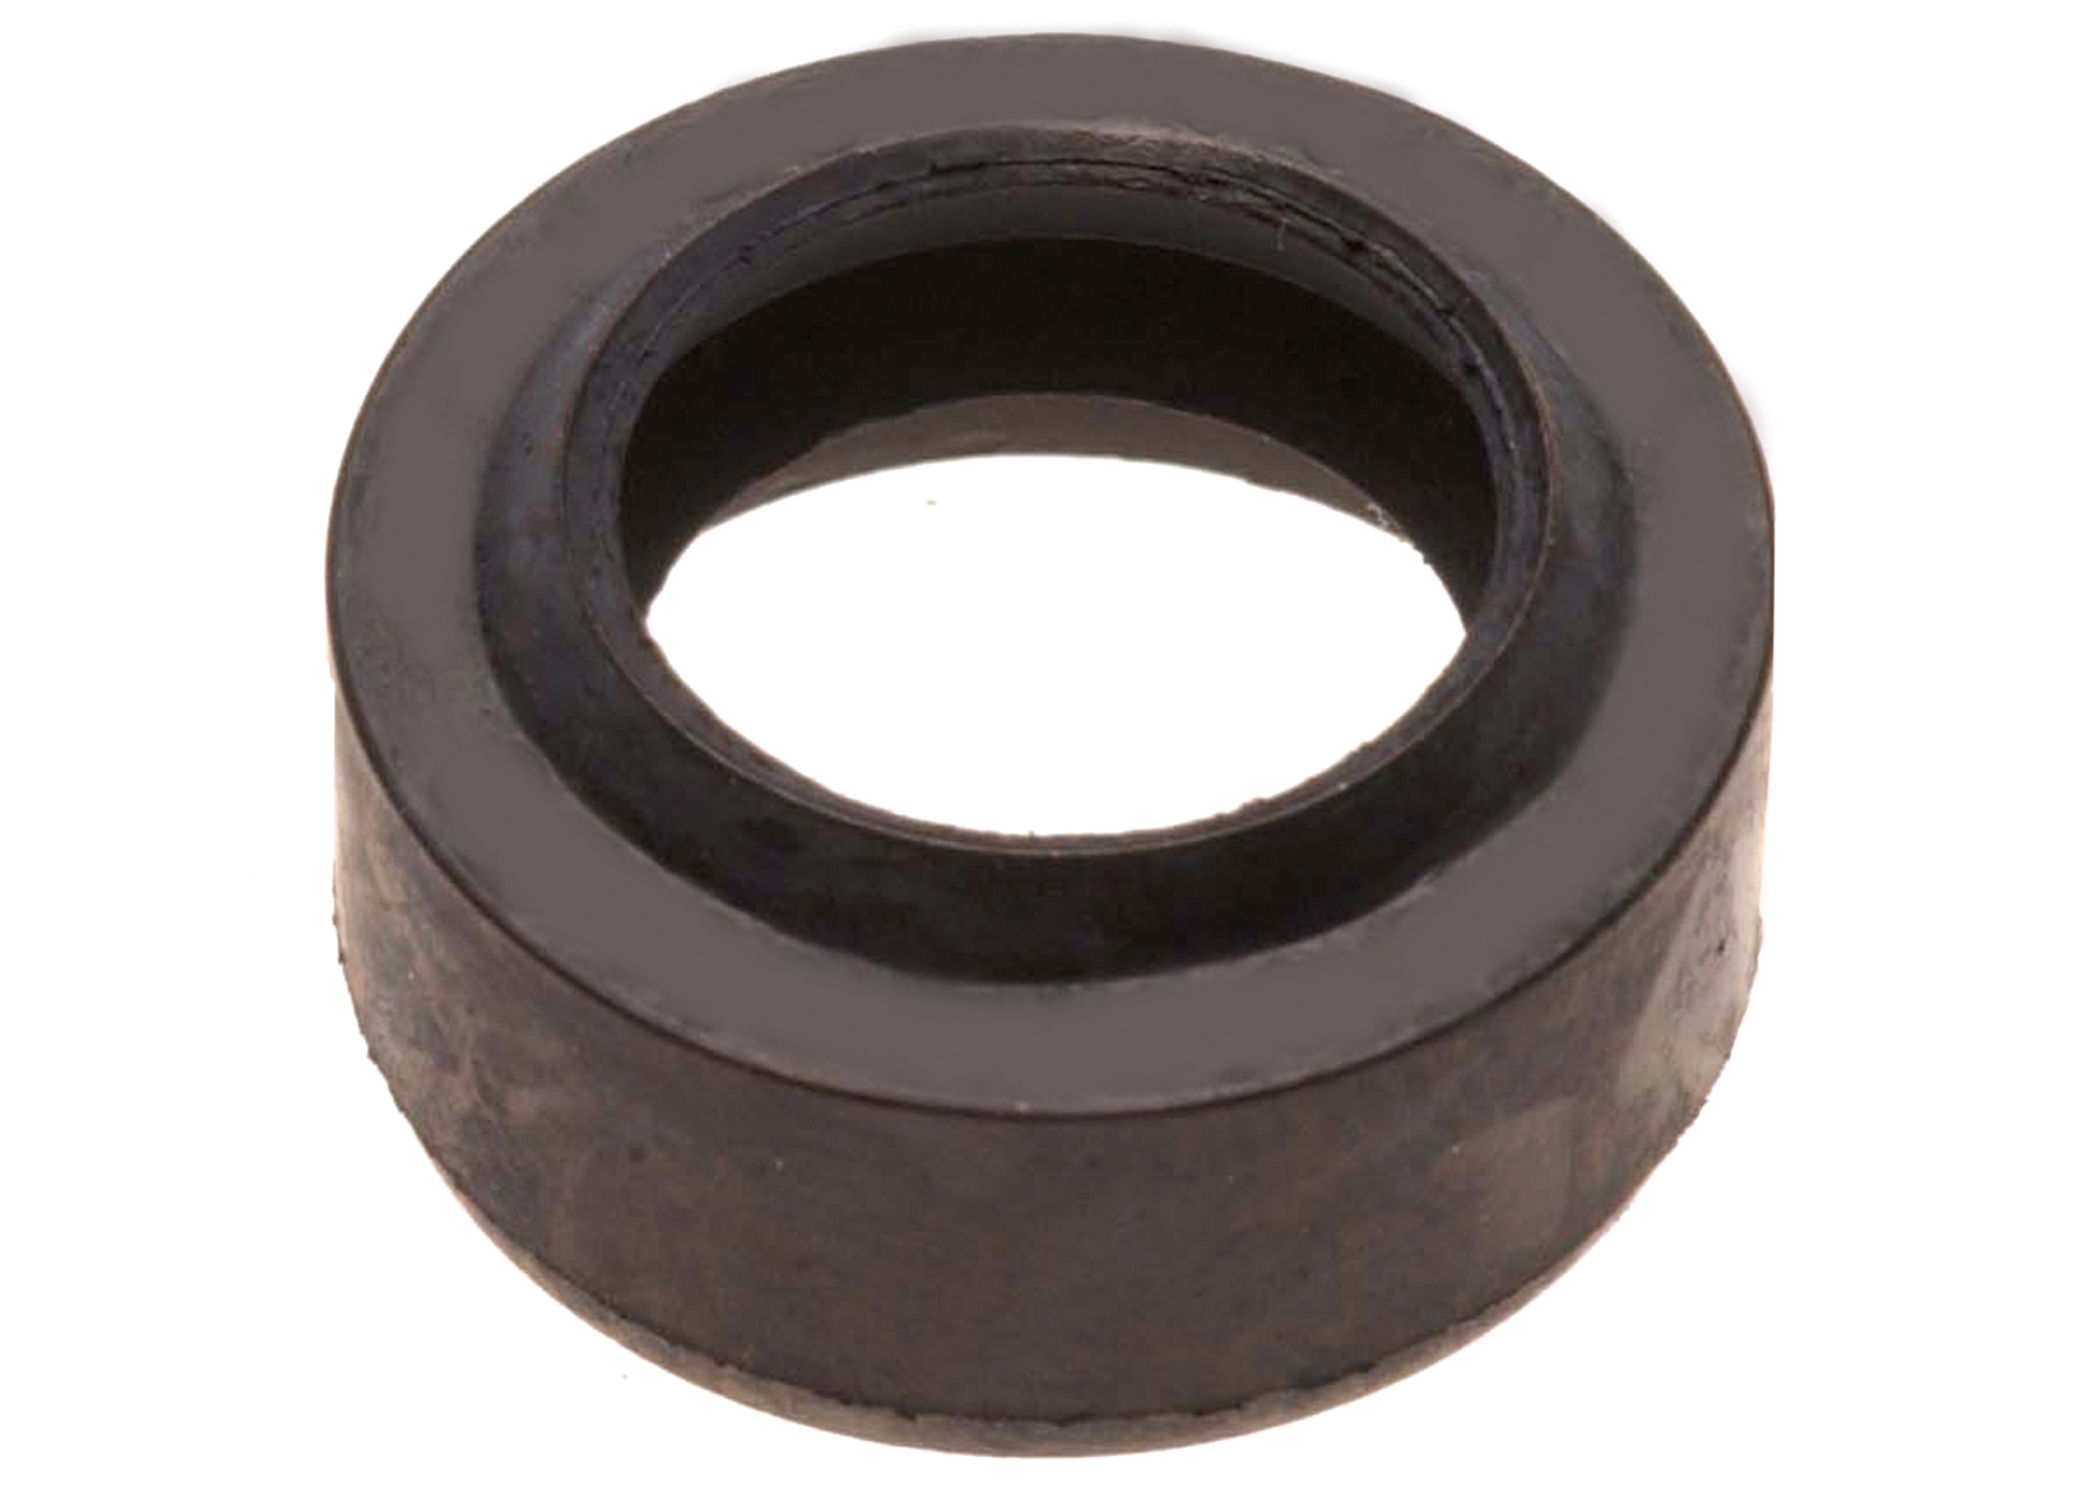 GM GENUINE PARTS - Automatic Transmission Manual Shaft Seal - GMP 8644709